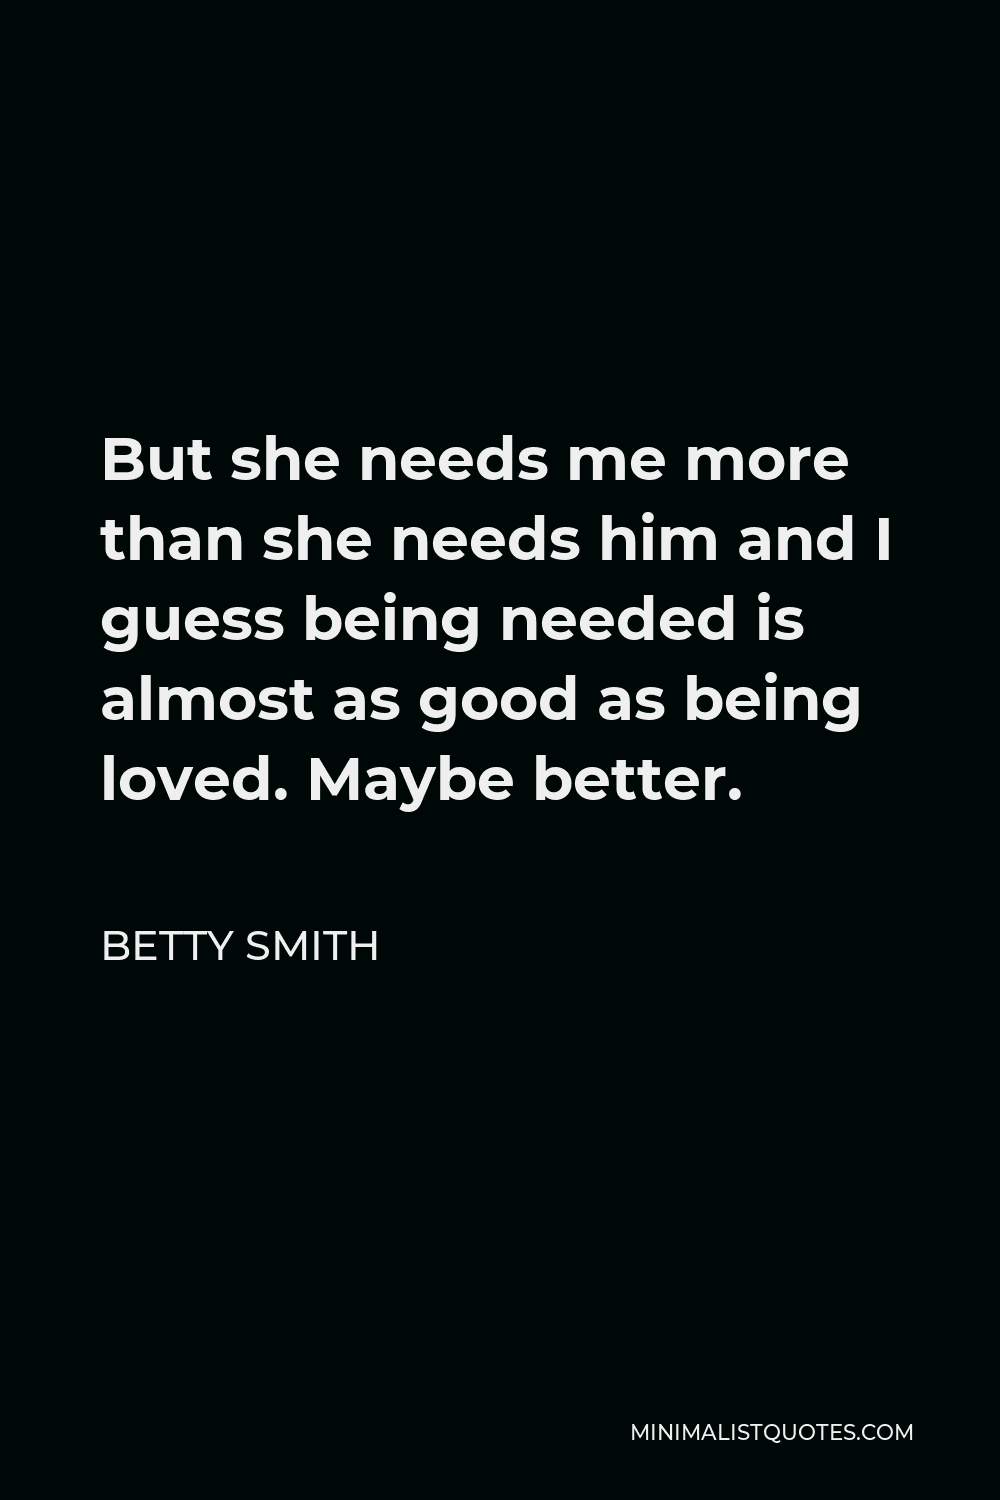 Betty Smith Quote - But she needs me more than she needs him and I guess being needed is almost as good as being loved. Maybe better.